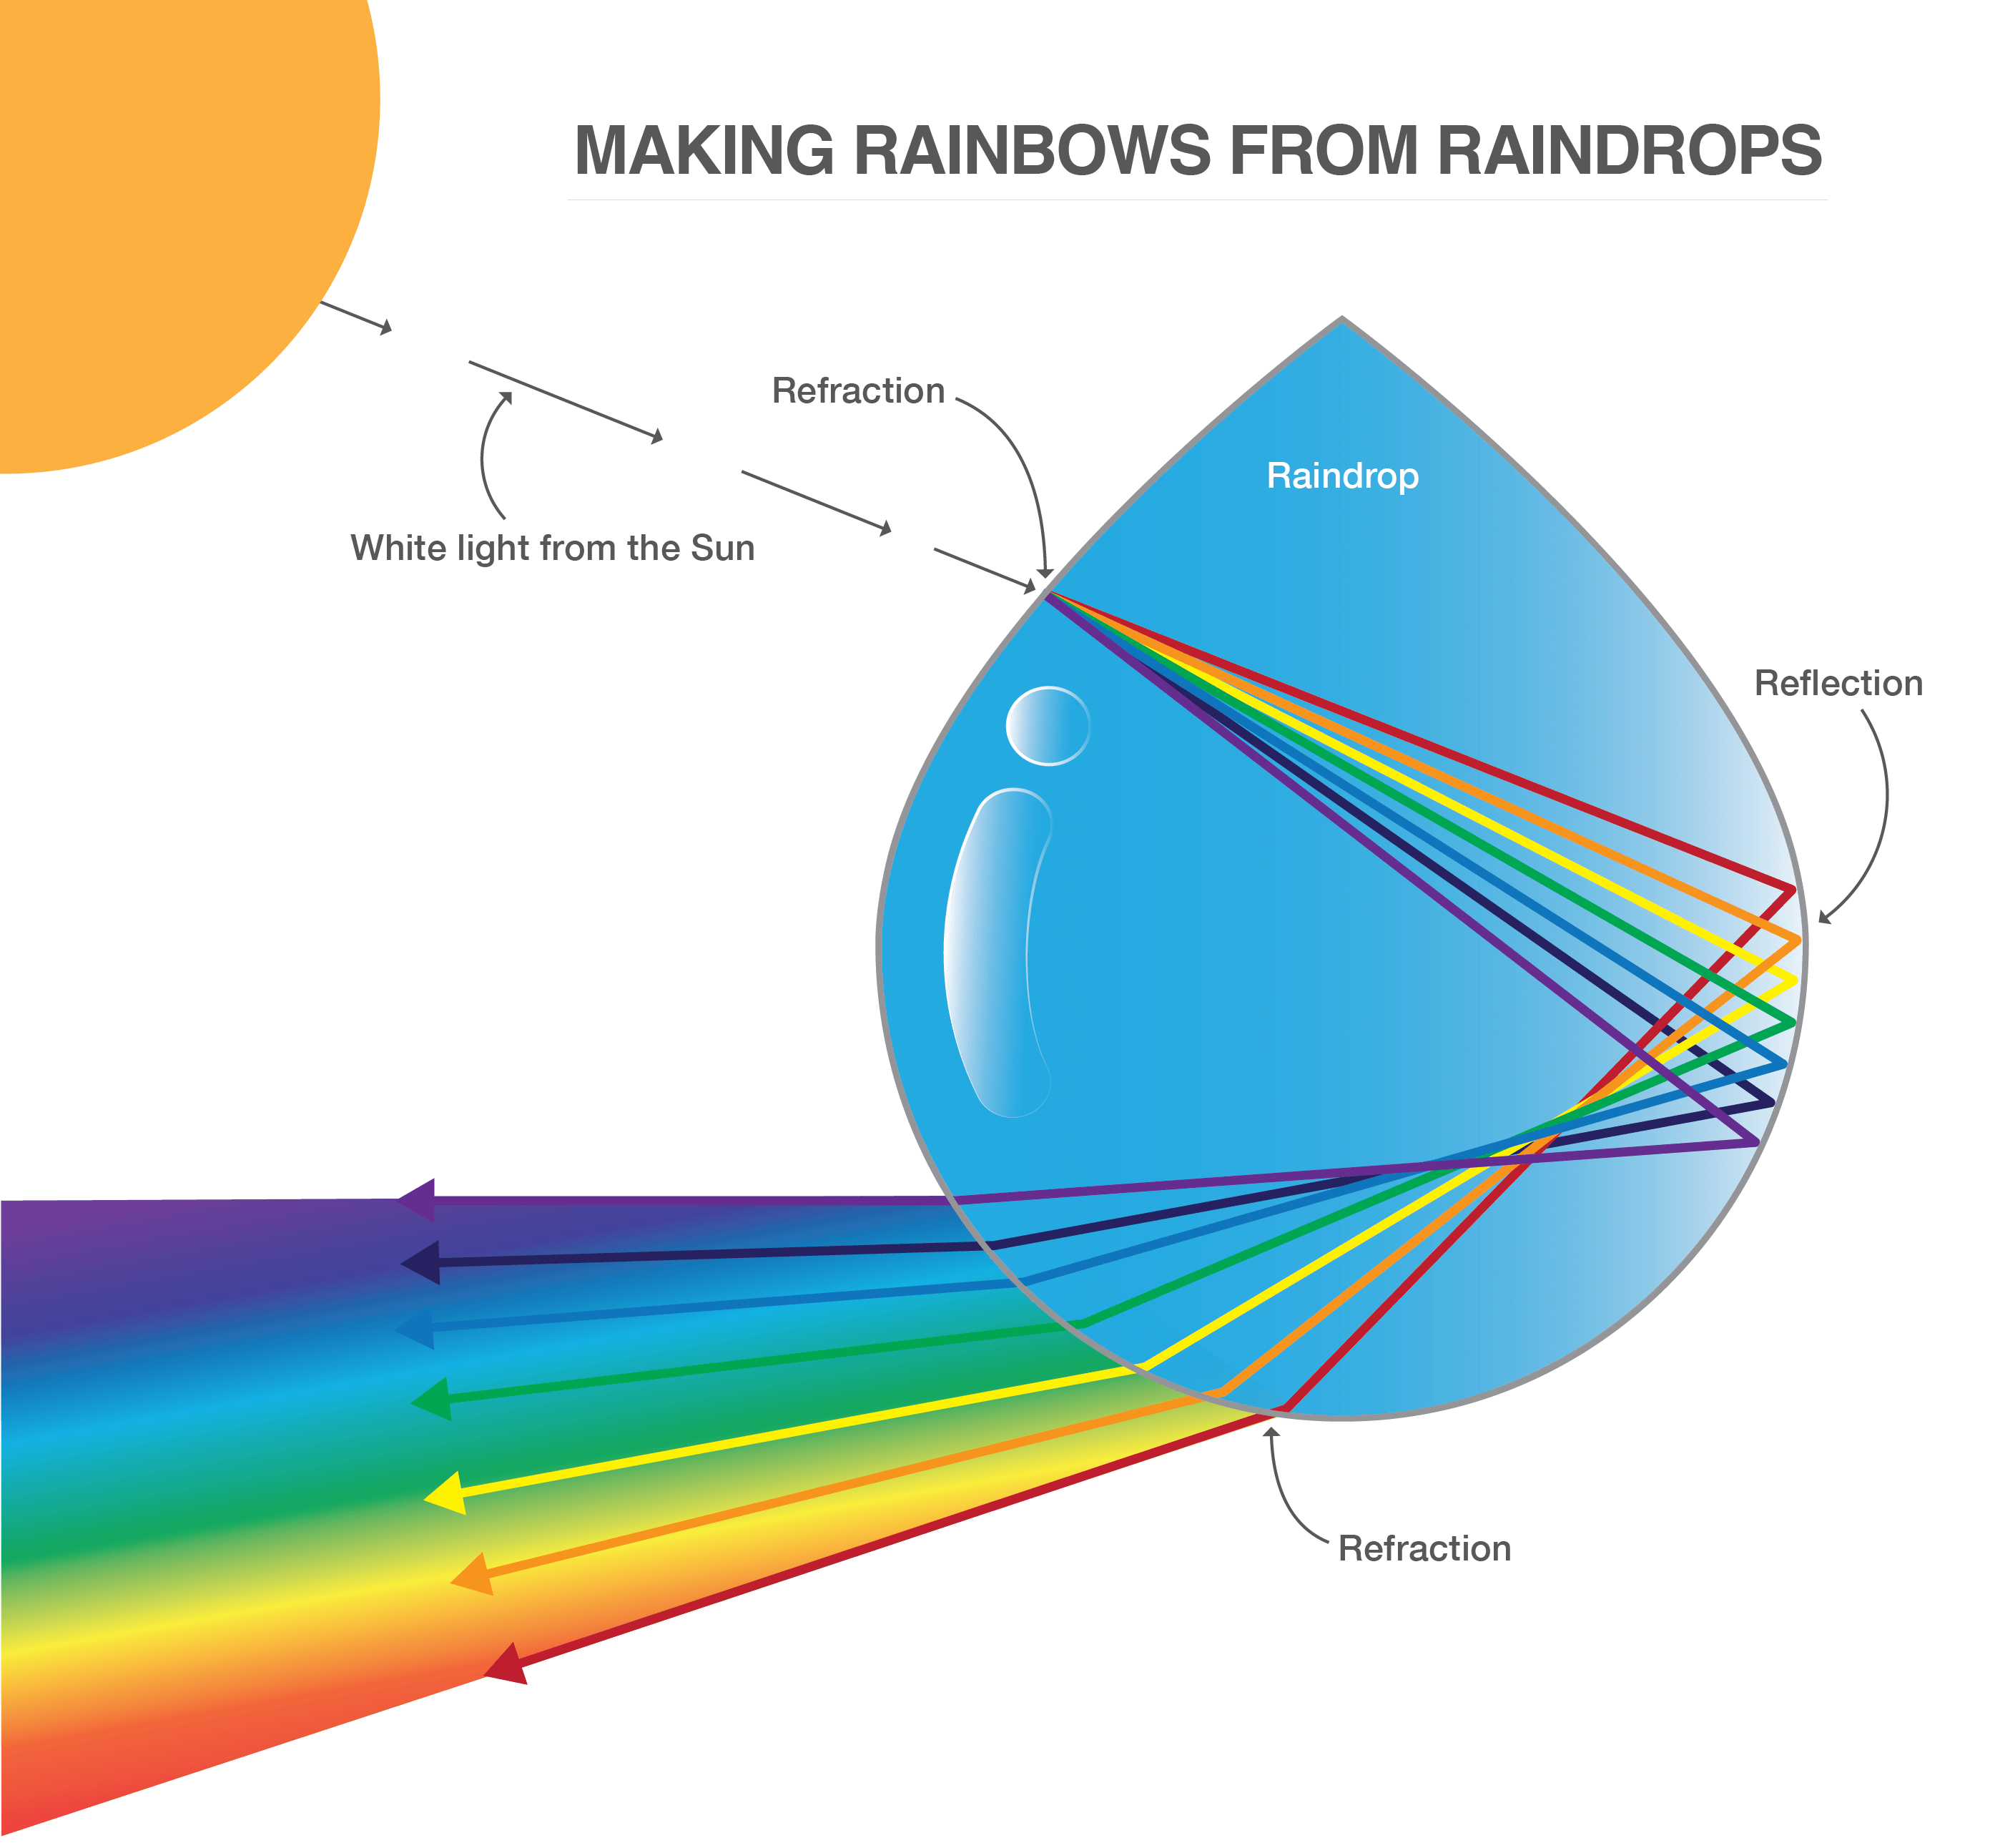 A graphic with a white background shows a large, blue cartoon raindrop. A yellow semicircle in the upper left corner represents the sun, and a line linking it to the raindrop splinters into a rainbow ribbon that extends through the raindrop and arcs around to the lower left corner. At the top, text in black font reads "Making Rainbows From Raindrops."